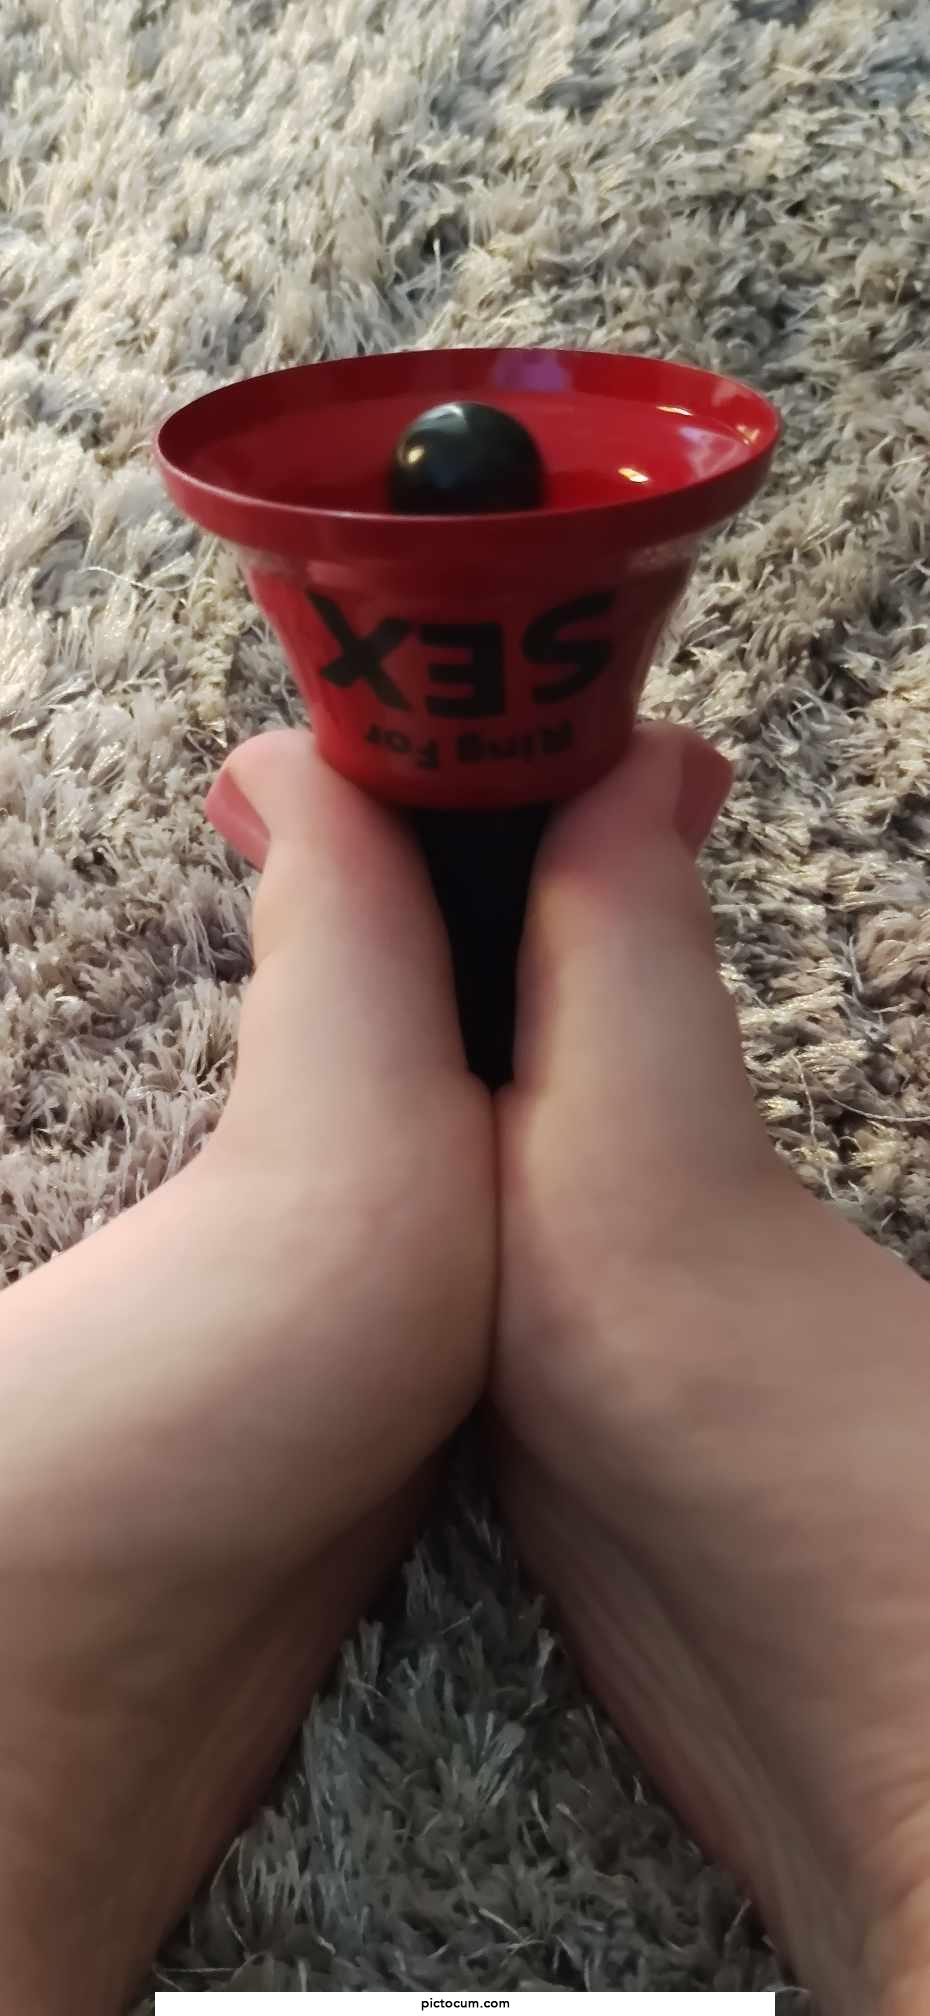 Would you ring the bell? 🤭 DM's open😘